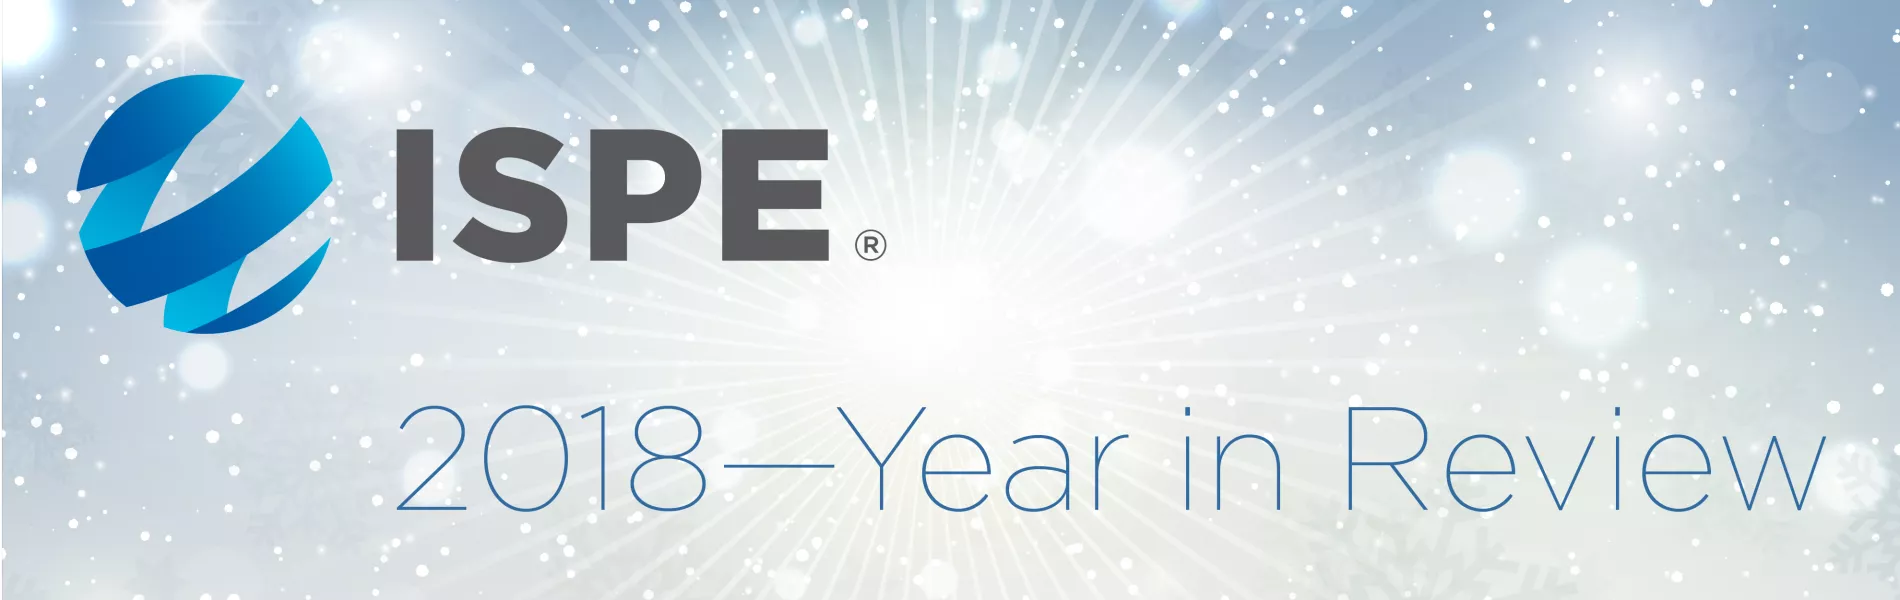 ISPE Holiday Banner